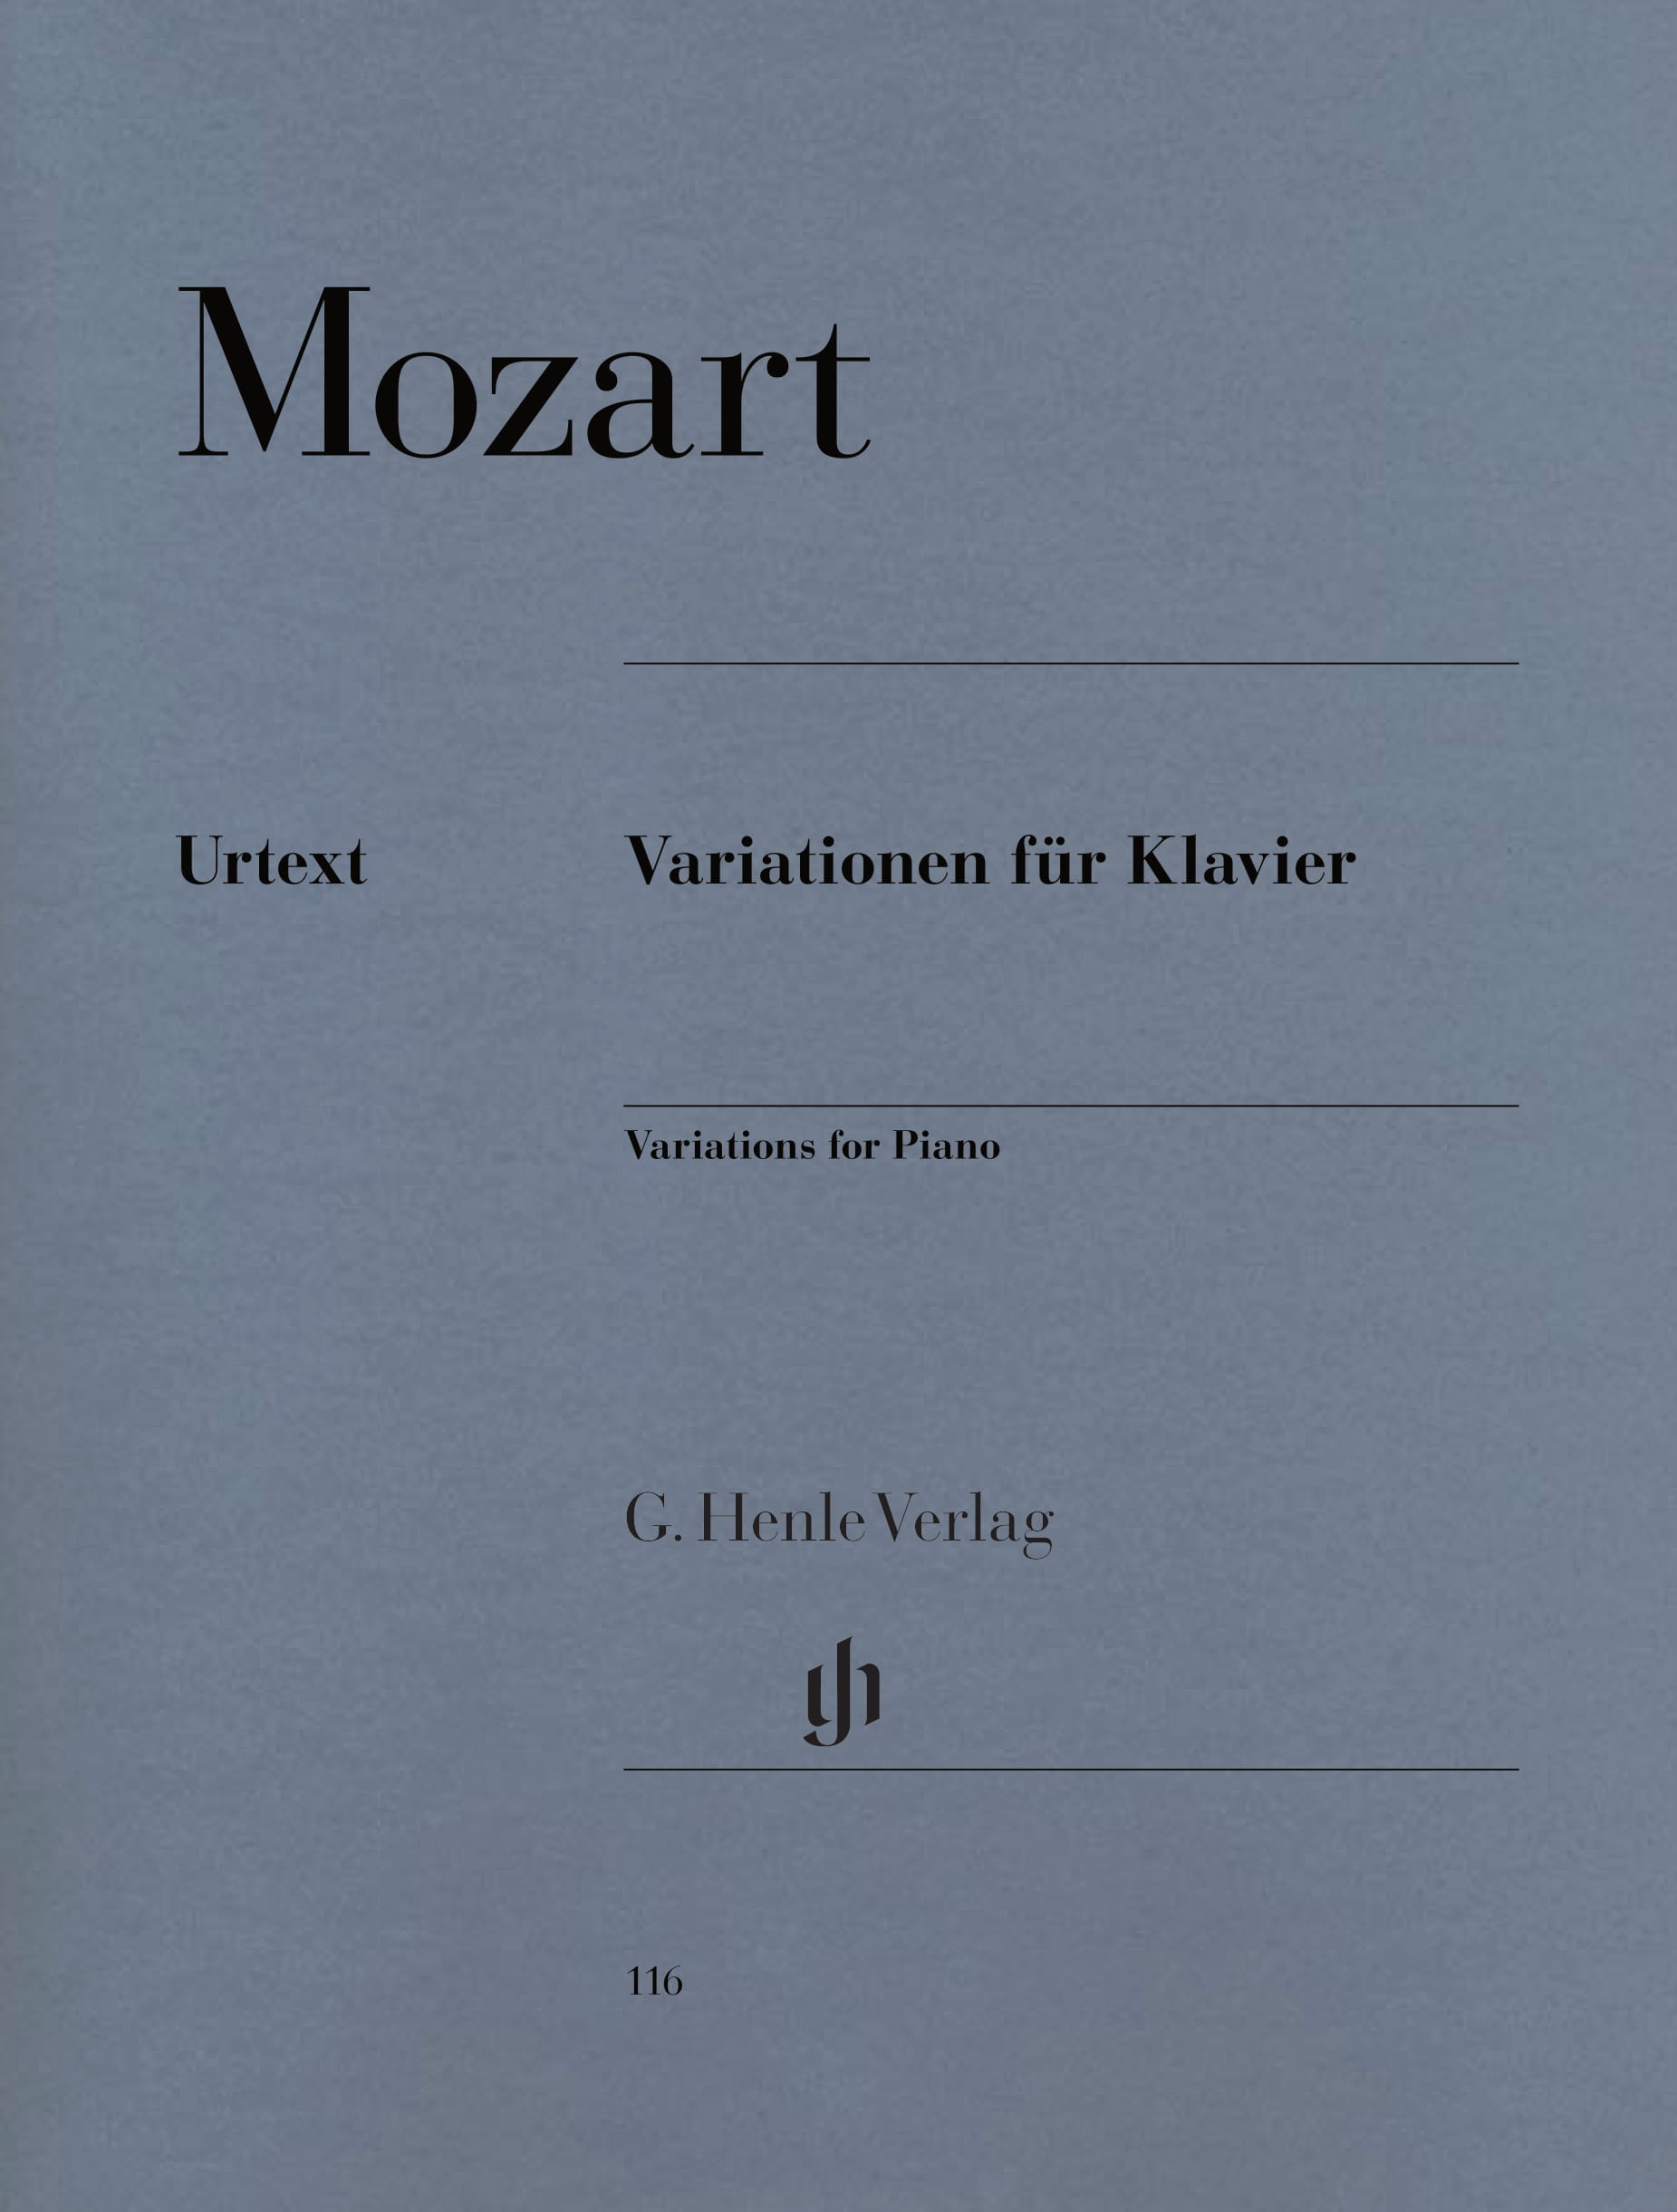 Mozart Variations for Piano (Henle) Piano Traders